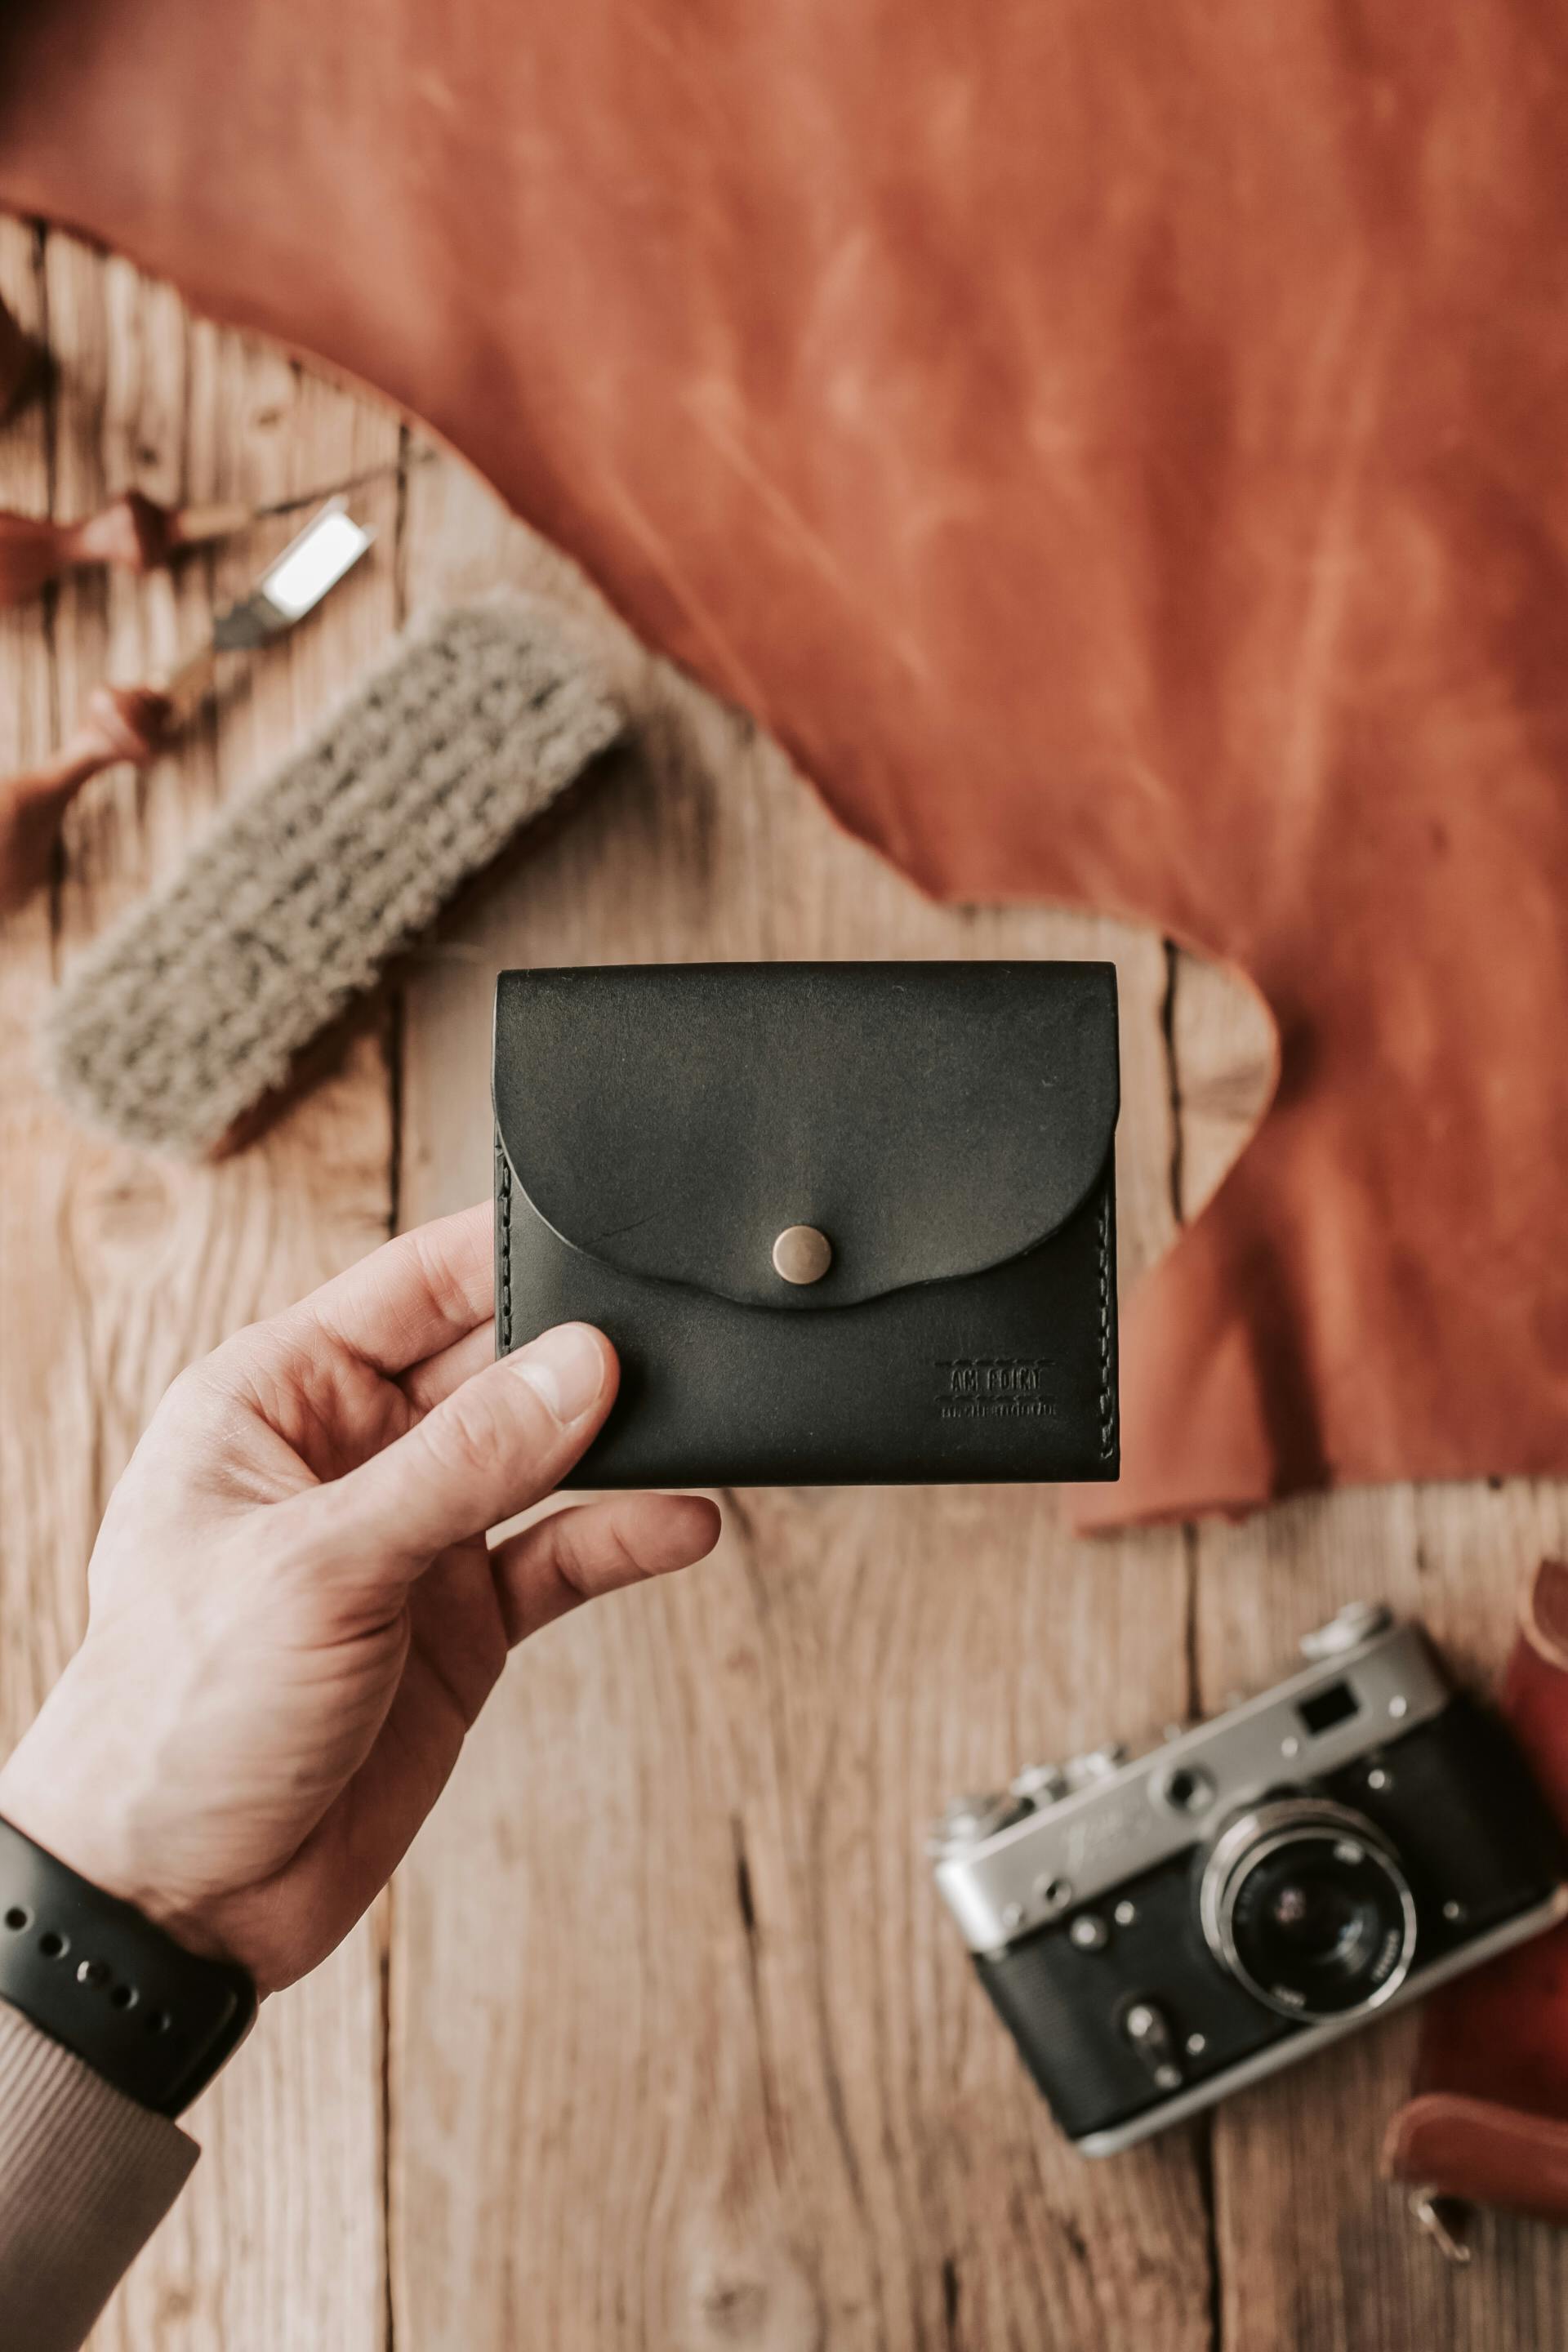 Close-Up Shot of a Person Holding a Black Leather Purse · Free Stock Photo